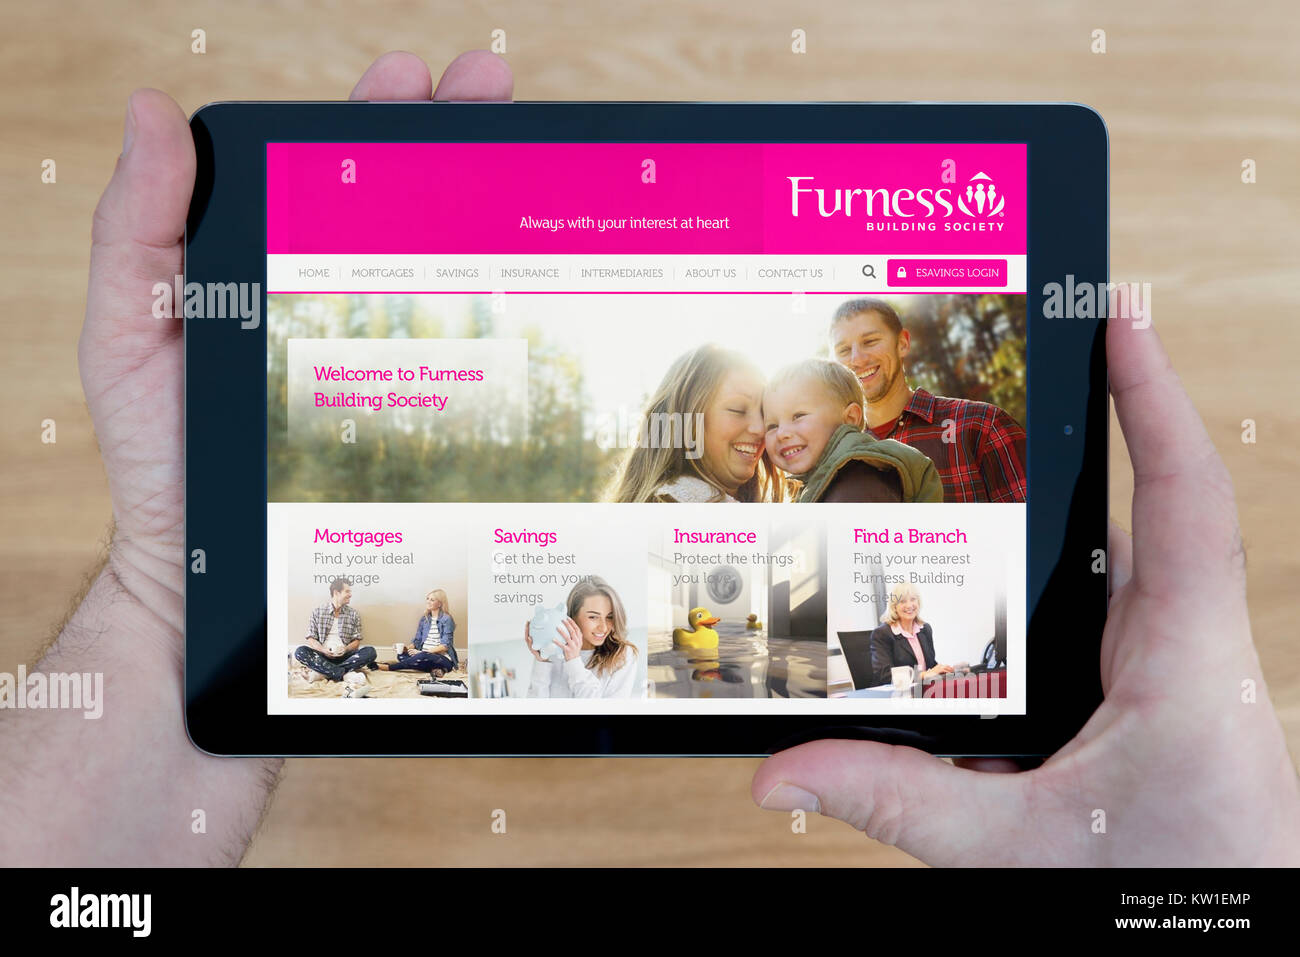 A man looks at the Furness Building Society website on his iPad tablet device, shot against a wooden table top background (Editorial use only) Stock Photo